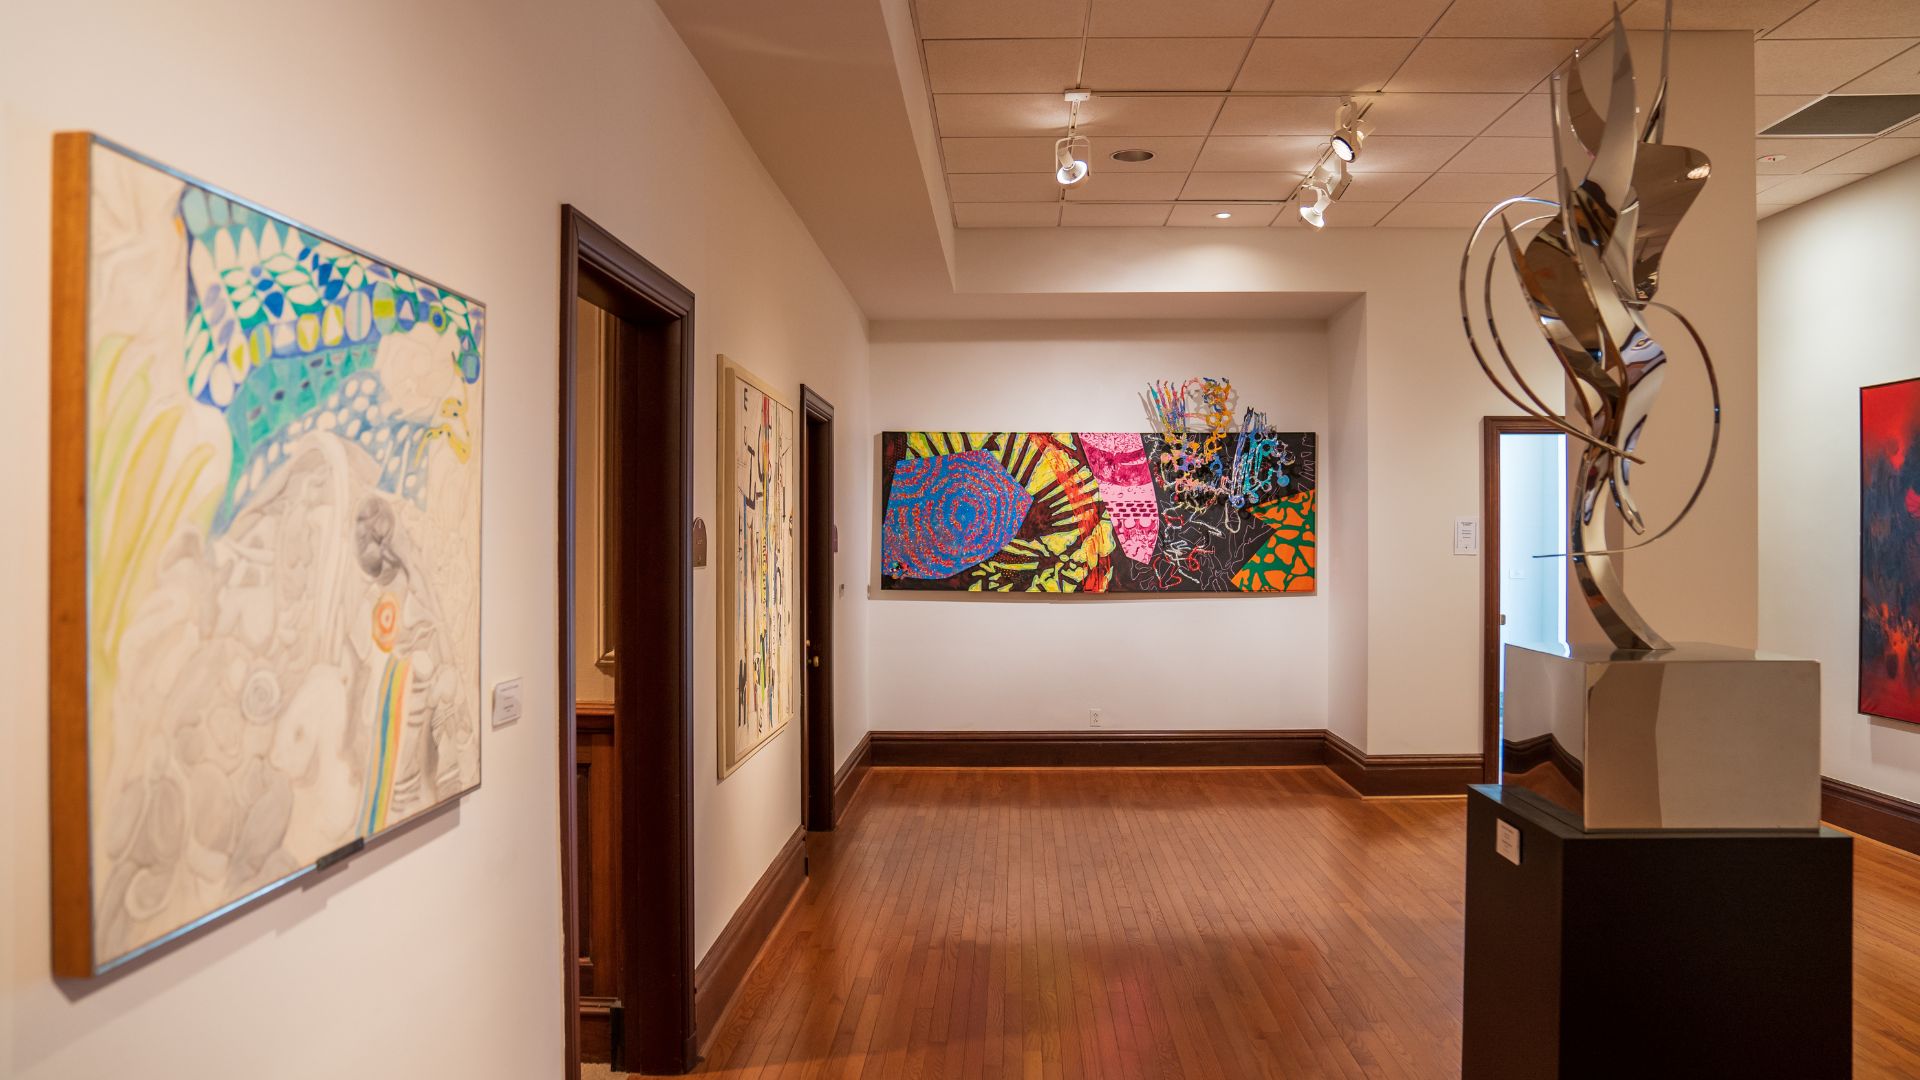 The Saint Louis University Museum of Art encompasses an impressive permanent collection of works by modern masters.